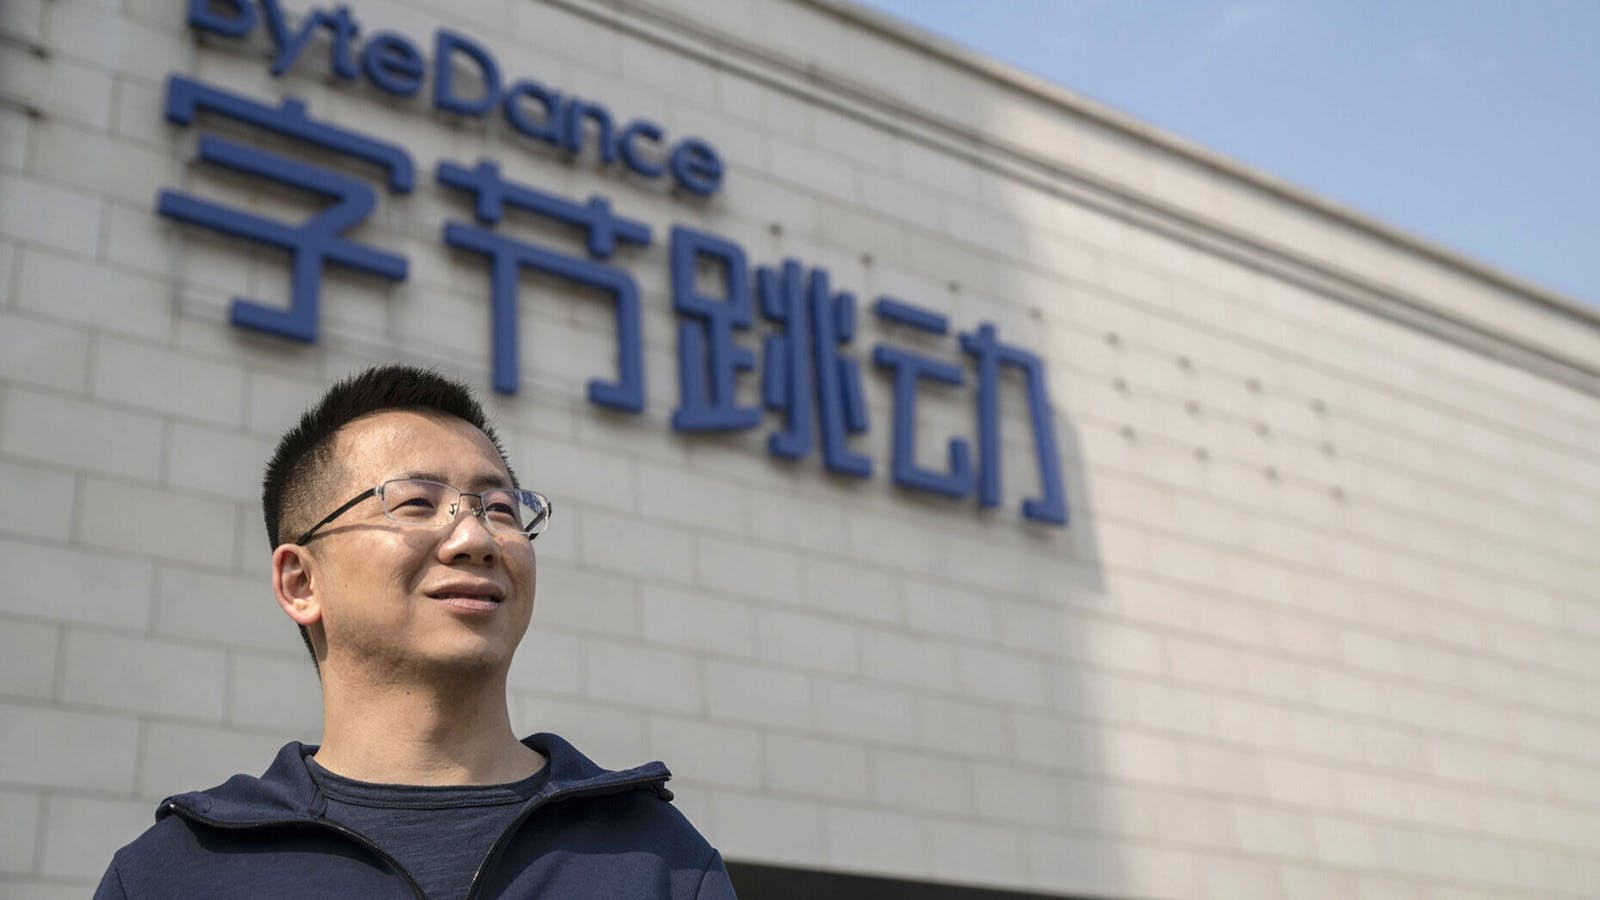 ByteDance founder Zhang Yiming. Photo by Bloomberg